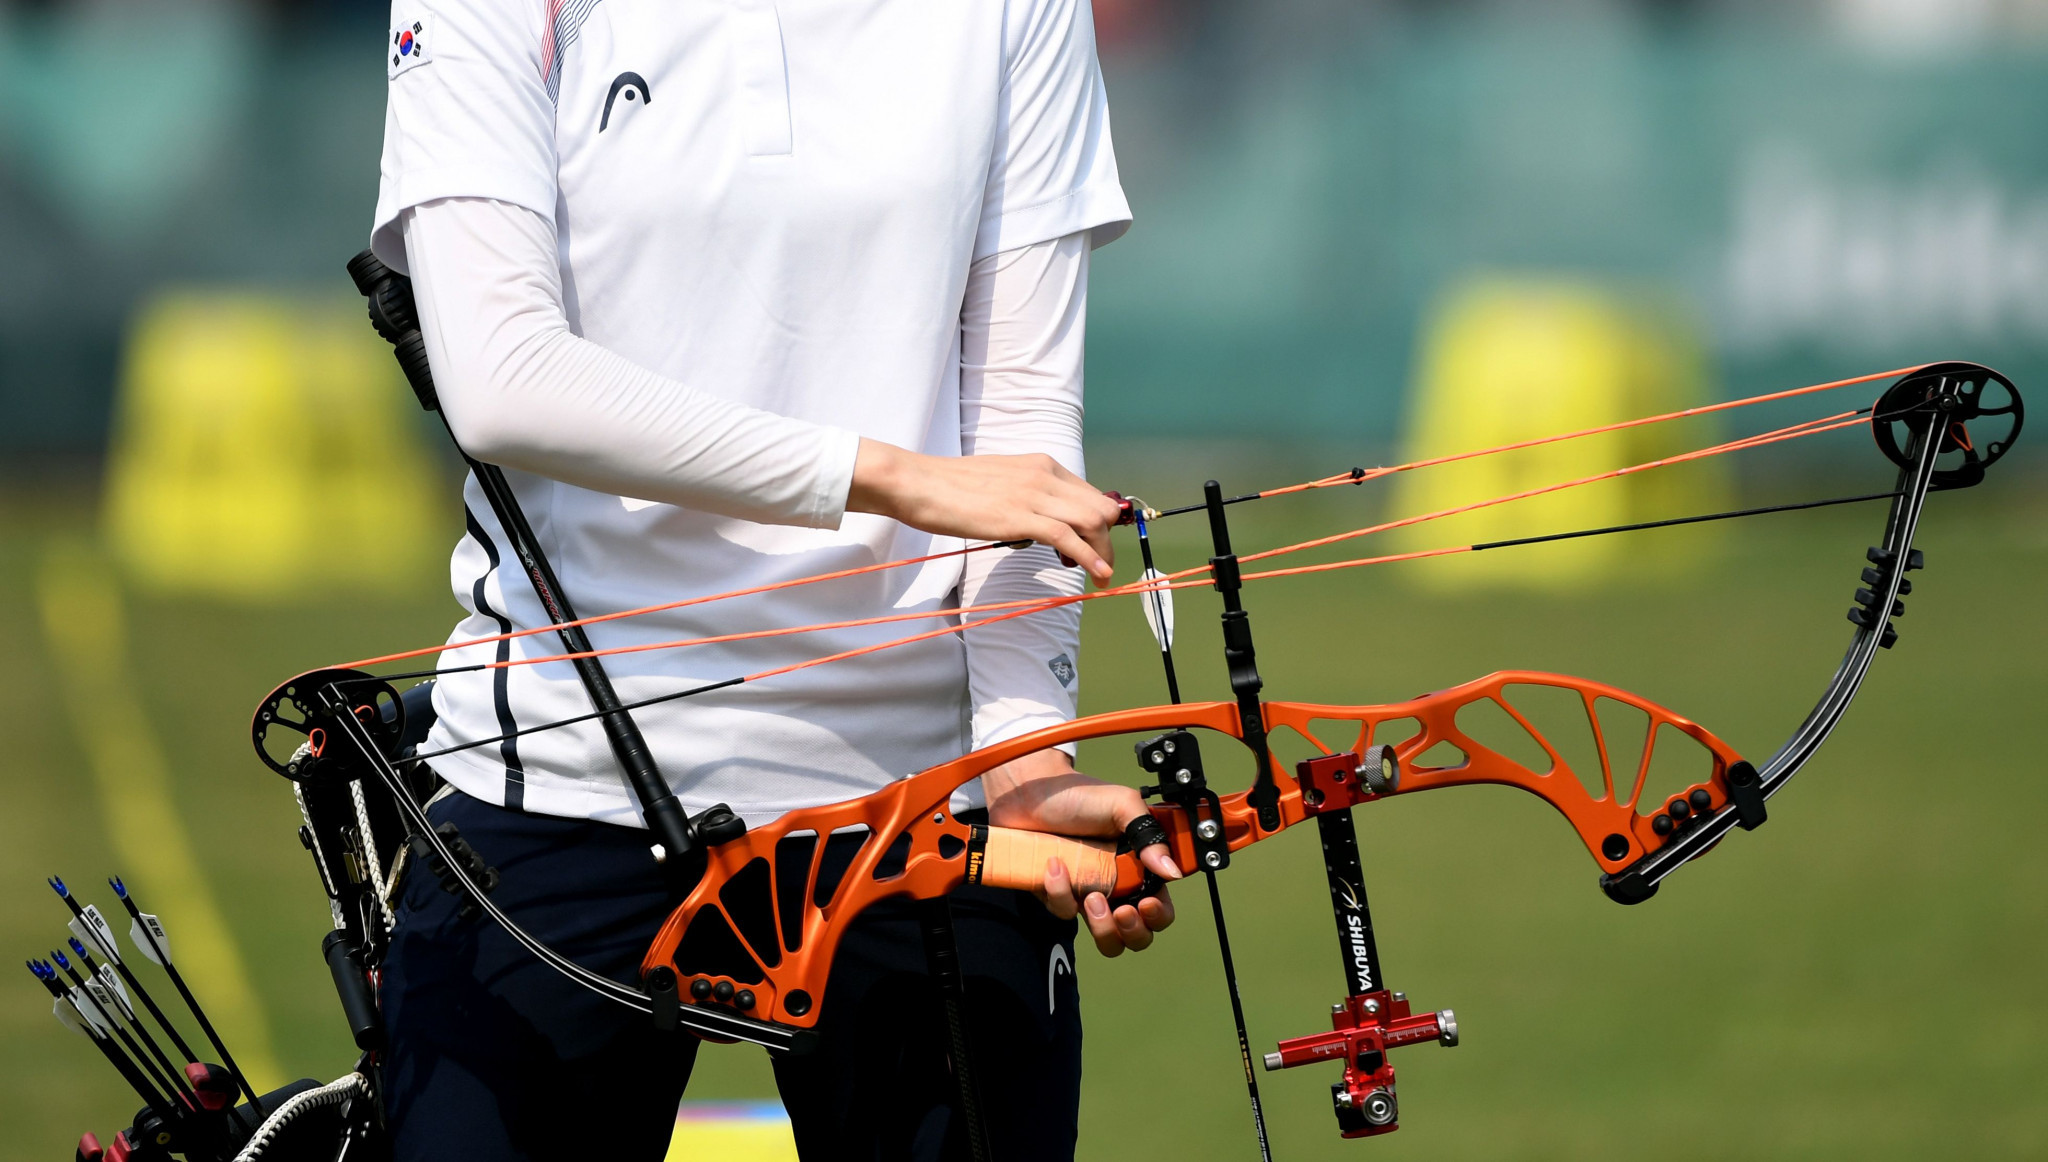 South Korea won bronze in the men's compound event at the Archery World Cup in Gwangju and the nation is set to compete in the final of the women's compound ©Getty Images